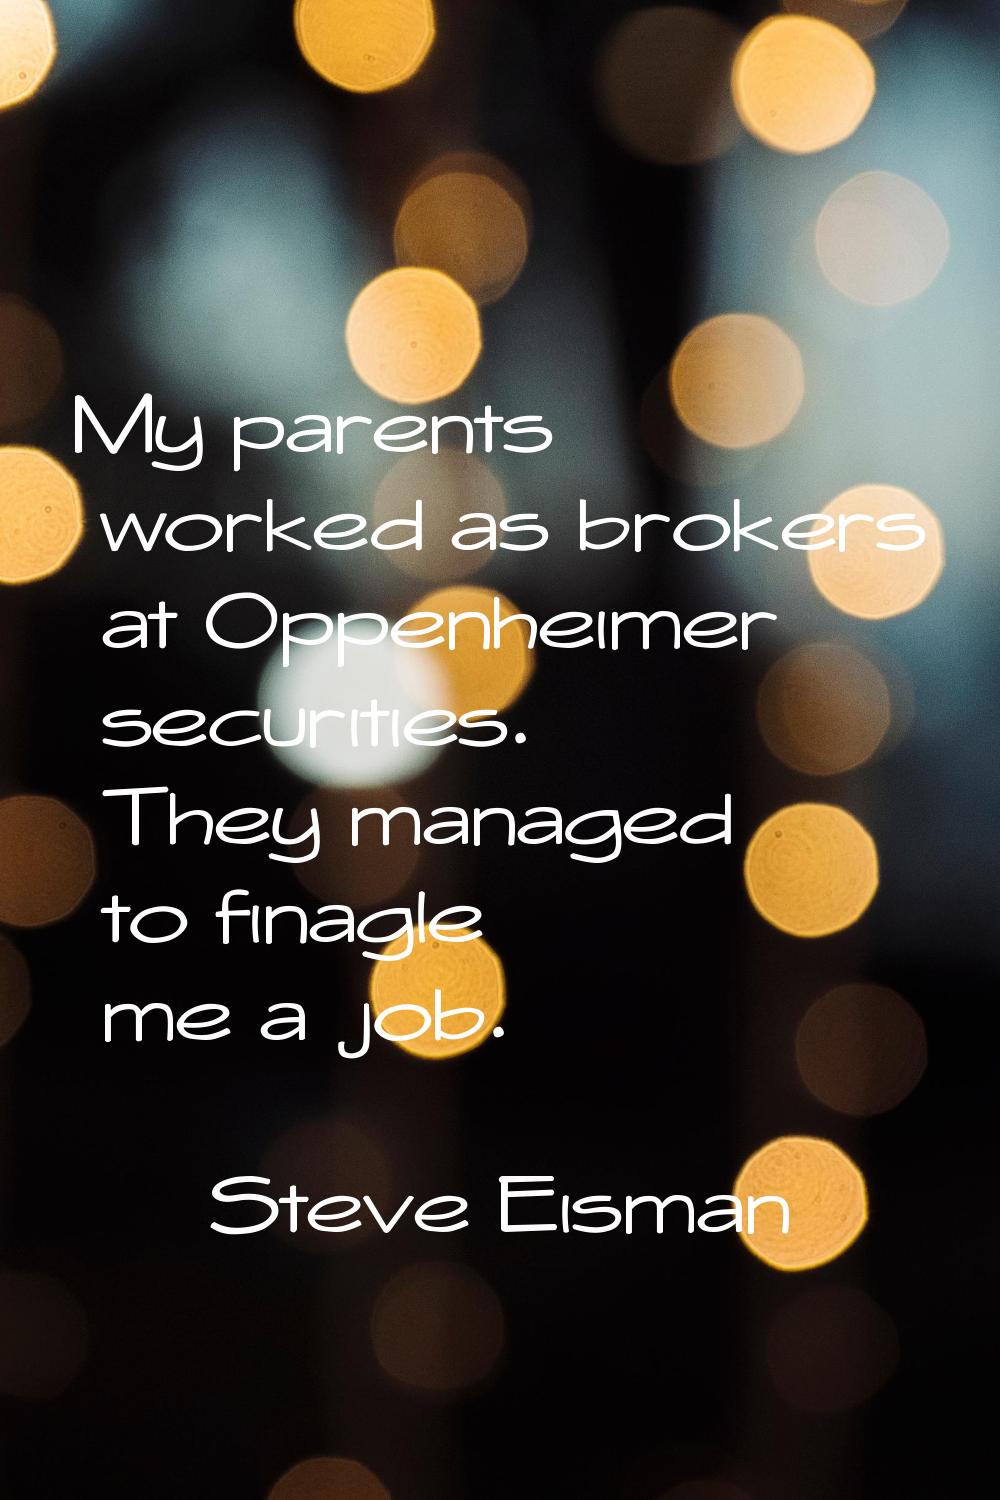 My parents worked as brokers at Oppenheimer securities. They managed to finagle me a job.